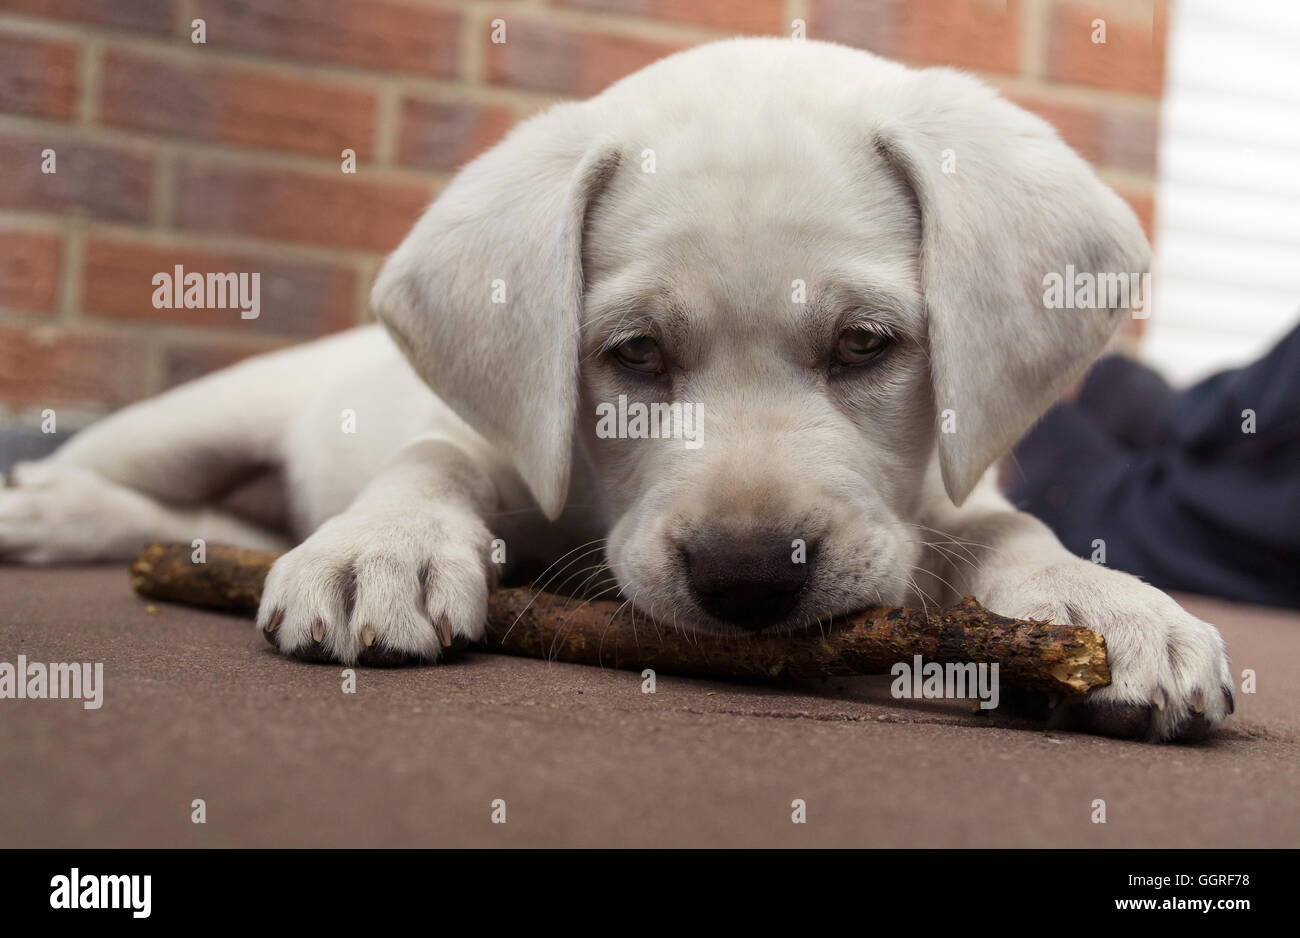 Sweet cute labrador dog puppy lying on the floor and chewing on a branch stick Stock Photo